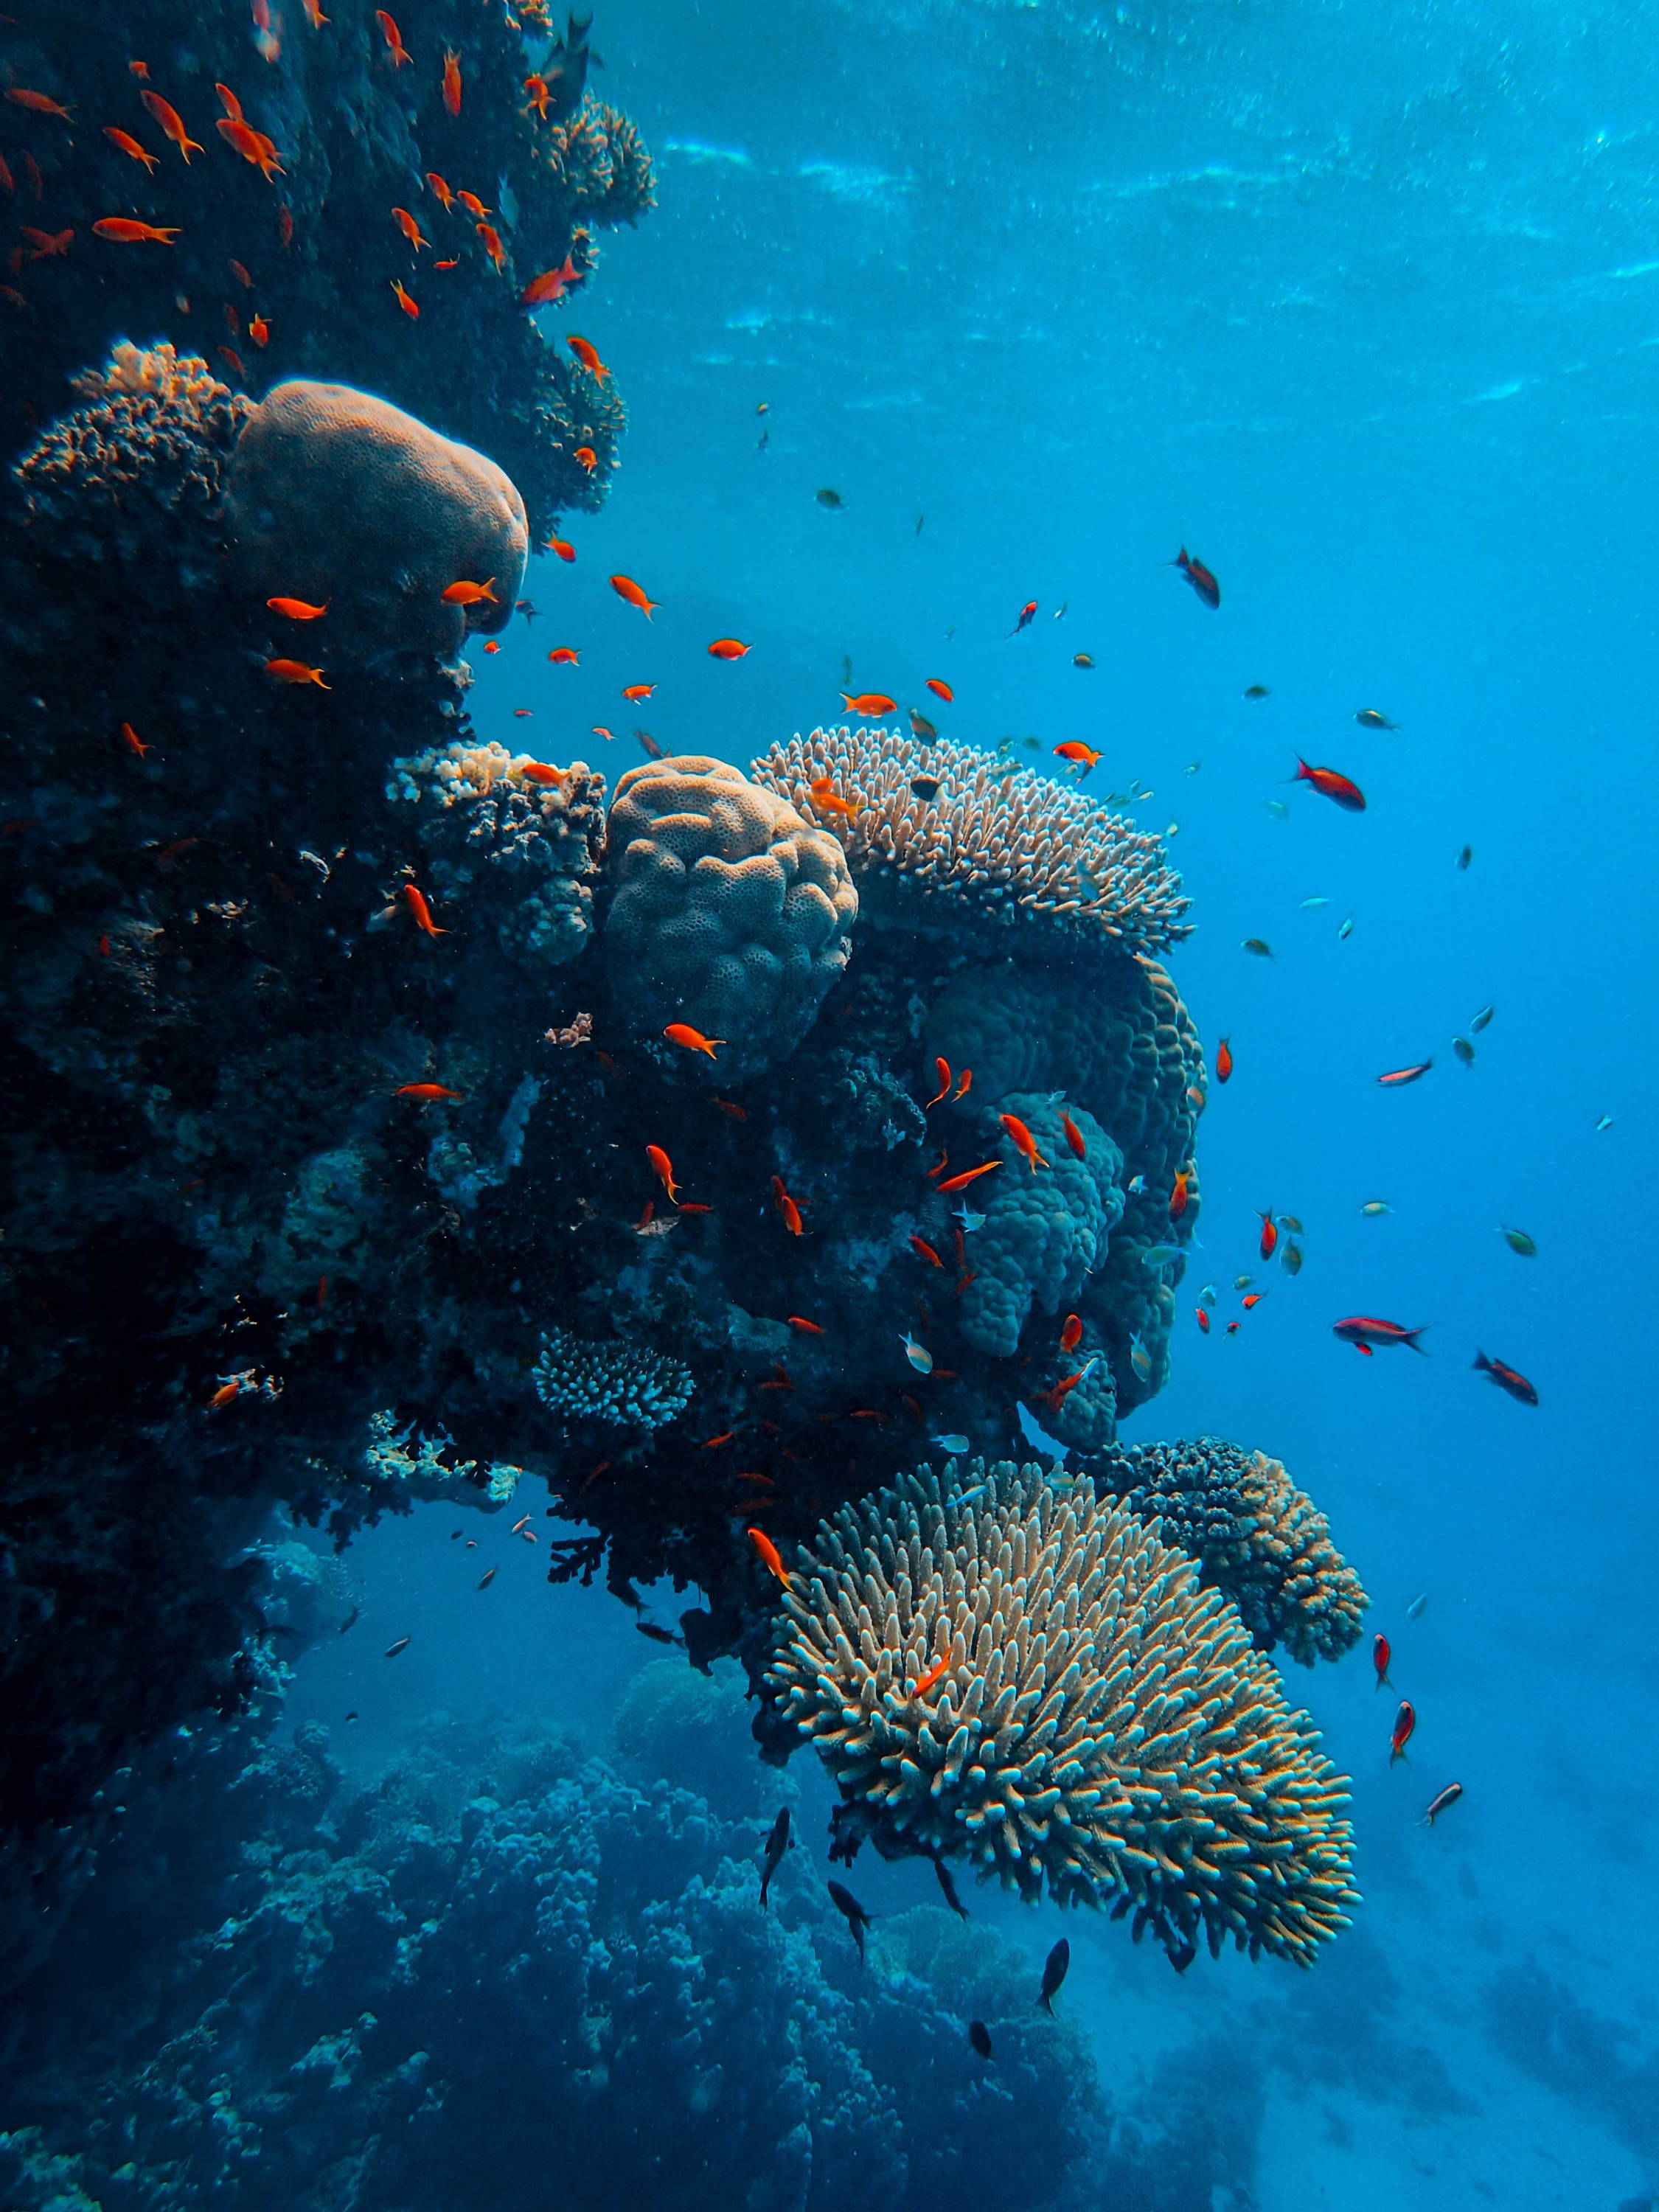 Save your health along with your oceans and corals from pollution and toxic chemicals by investing in reef-safe sunscreen